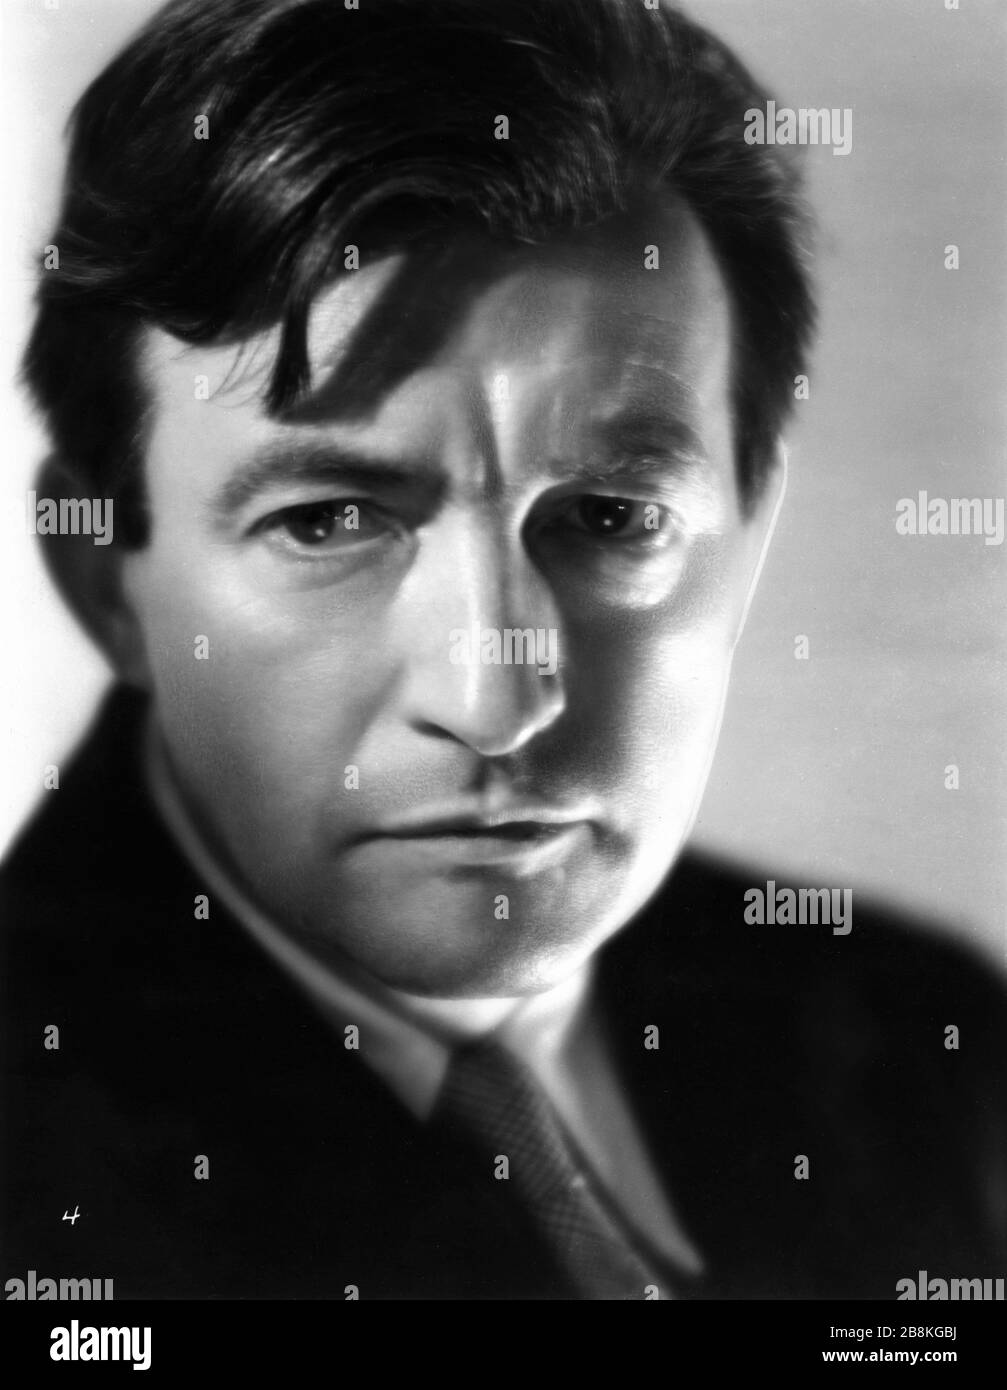 CLAUDE RAINS Publicity Portrait by Roman FREULICH for his appearance as THE INVISIBLE MAN 1933 director JAMES WHALE novel H. G. Wells screenplay R. C. Sherriff Universal Pictures Stock Photo